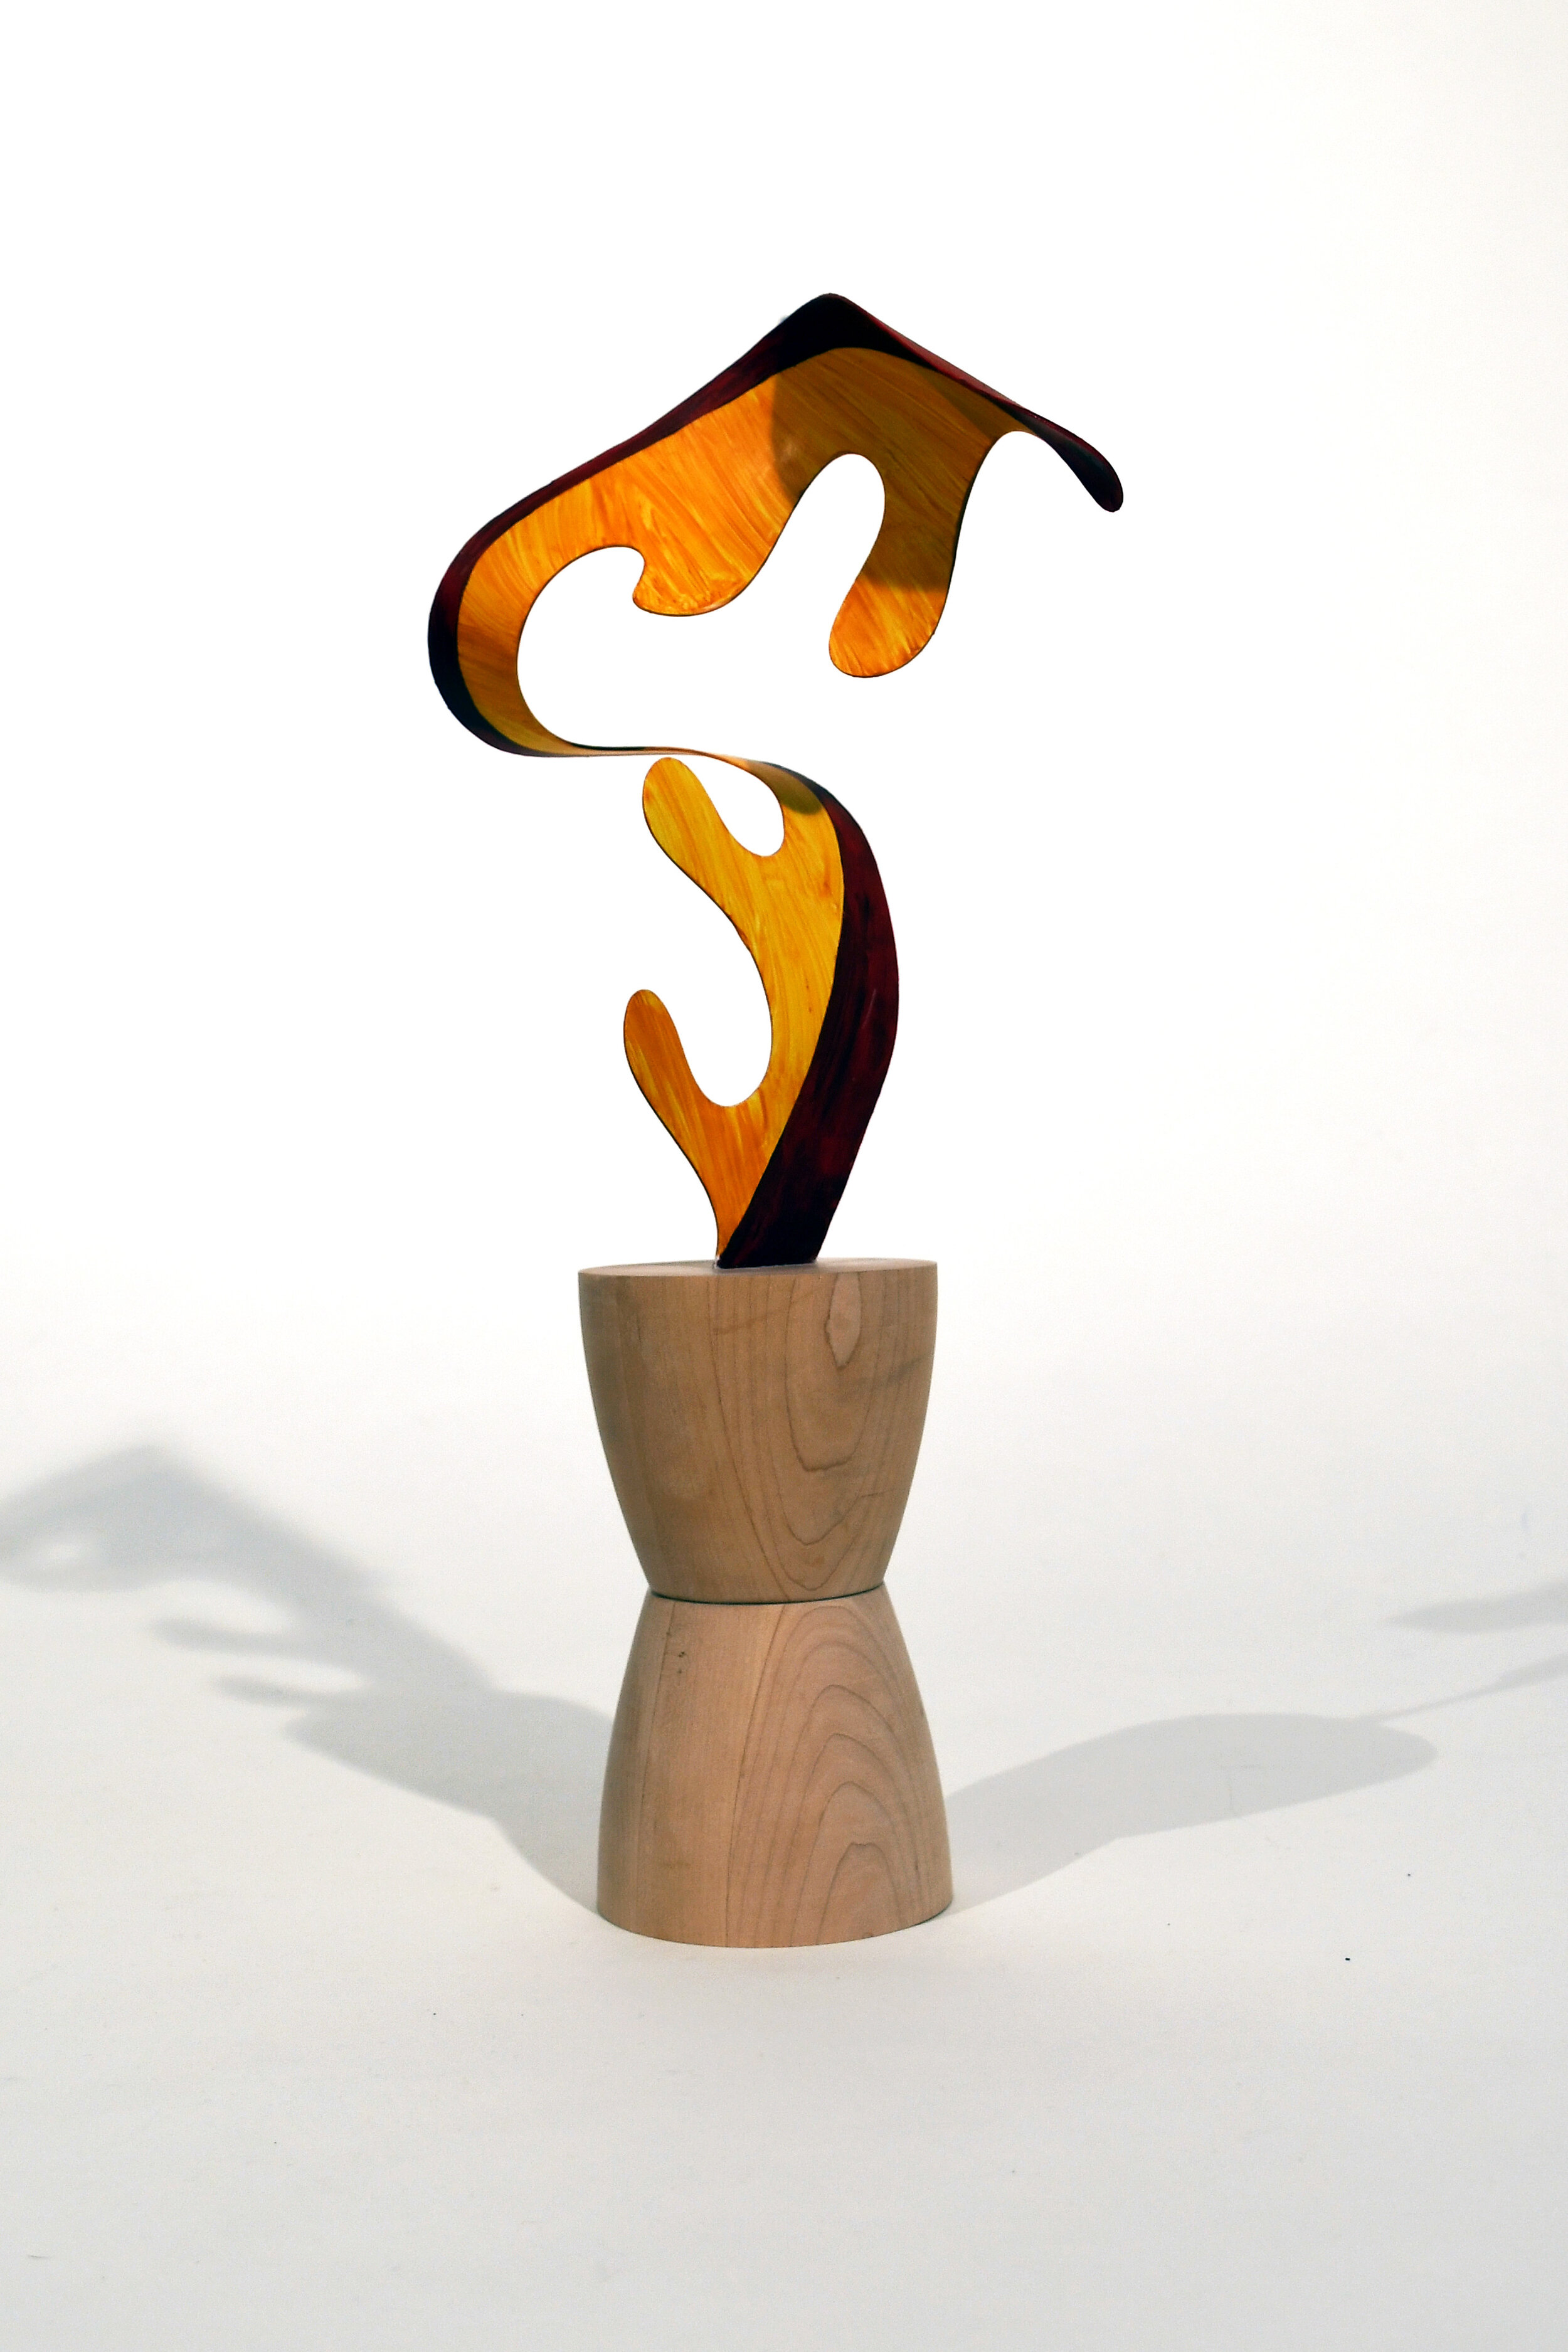  Wendy Letven , Flame,  2020. Painted Aluminum with on Maple Base, 18 x 8 x 5 inches 